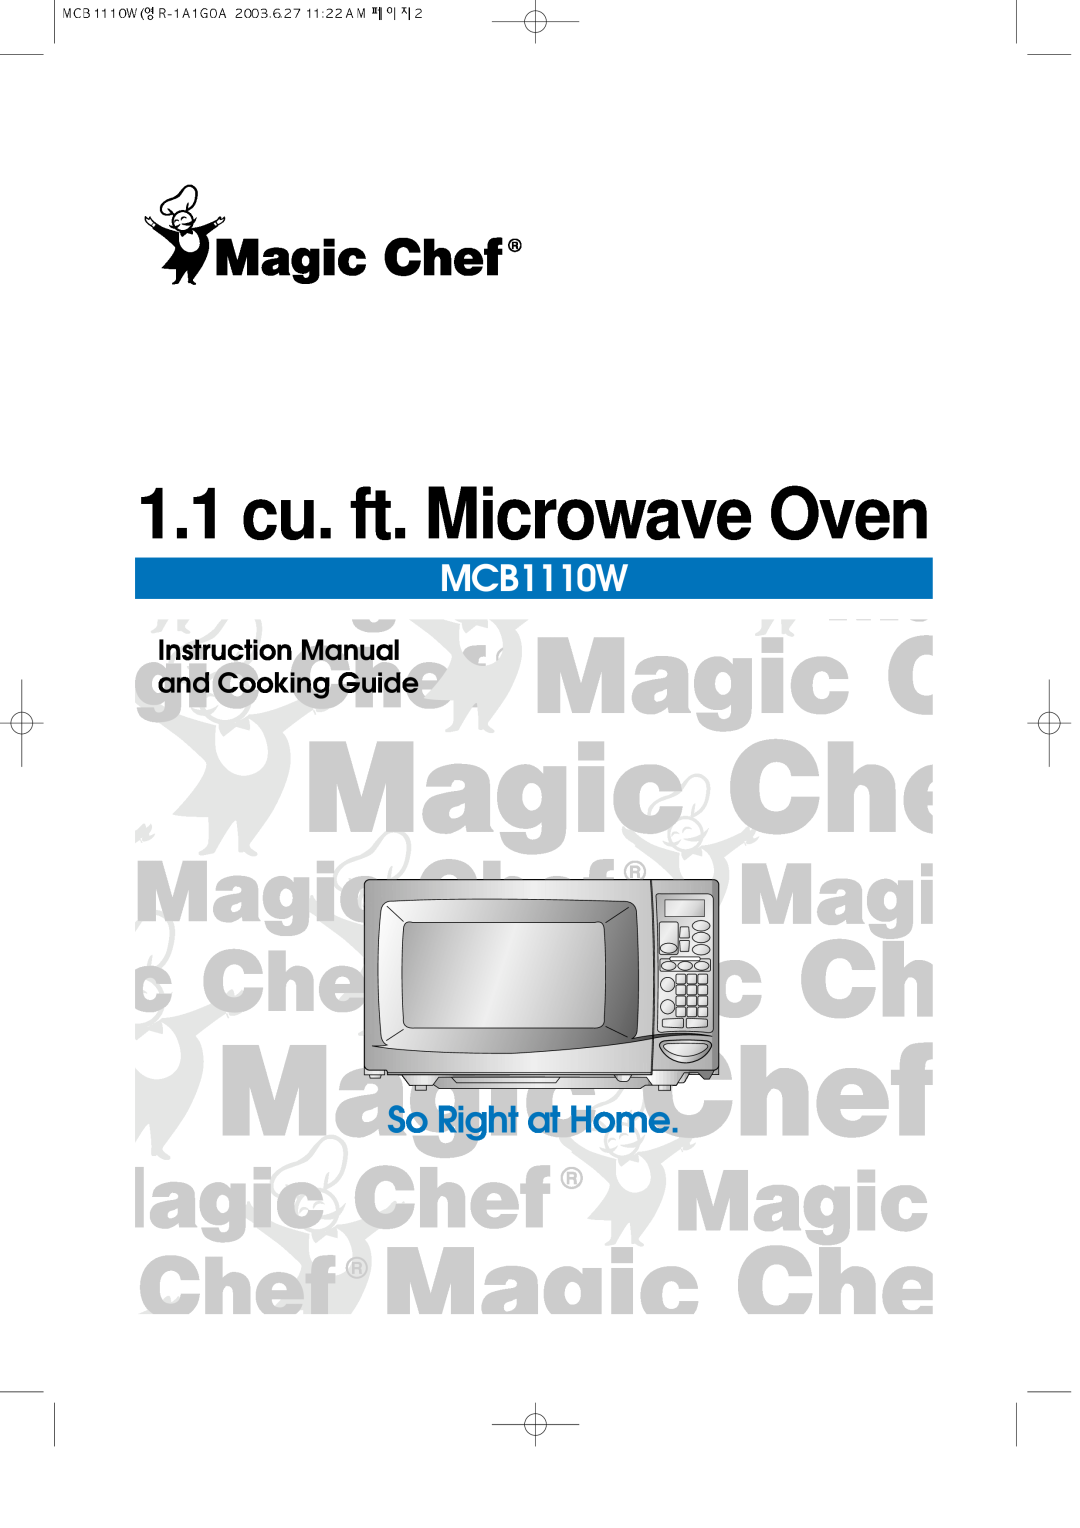 Magic Chef MCB1110W instruction manual 1.1 cu. ft. Microwave Oven, So Right at Home 